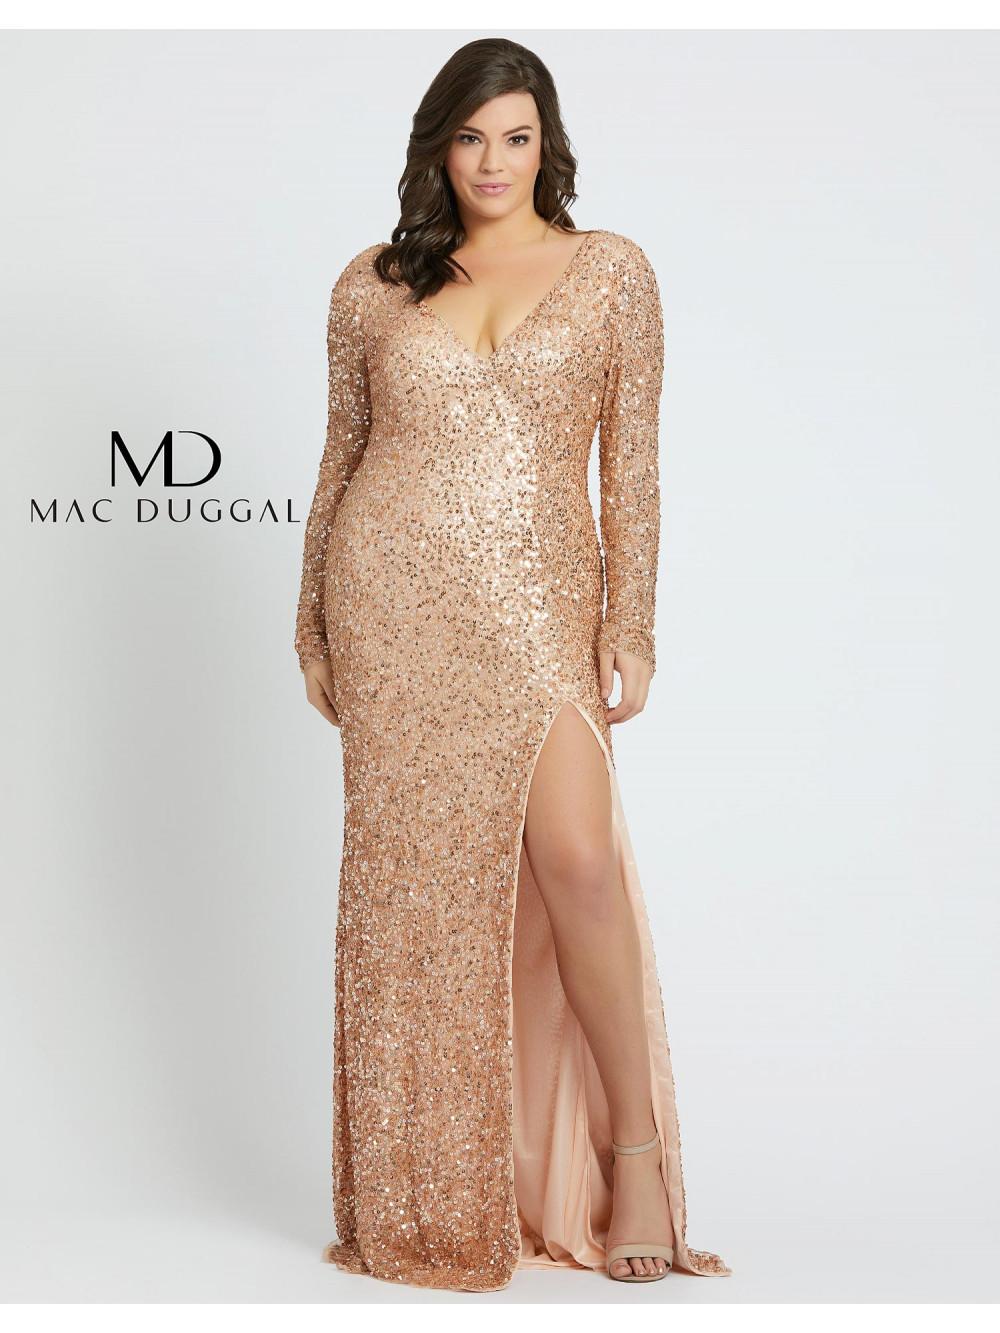 Villig anspore bytte rundt Fabulouss by Mac Duggal Sequin Dress 5012F - Gowntastic